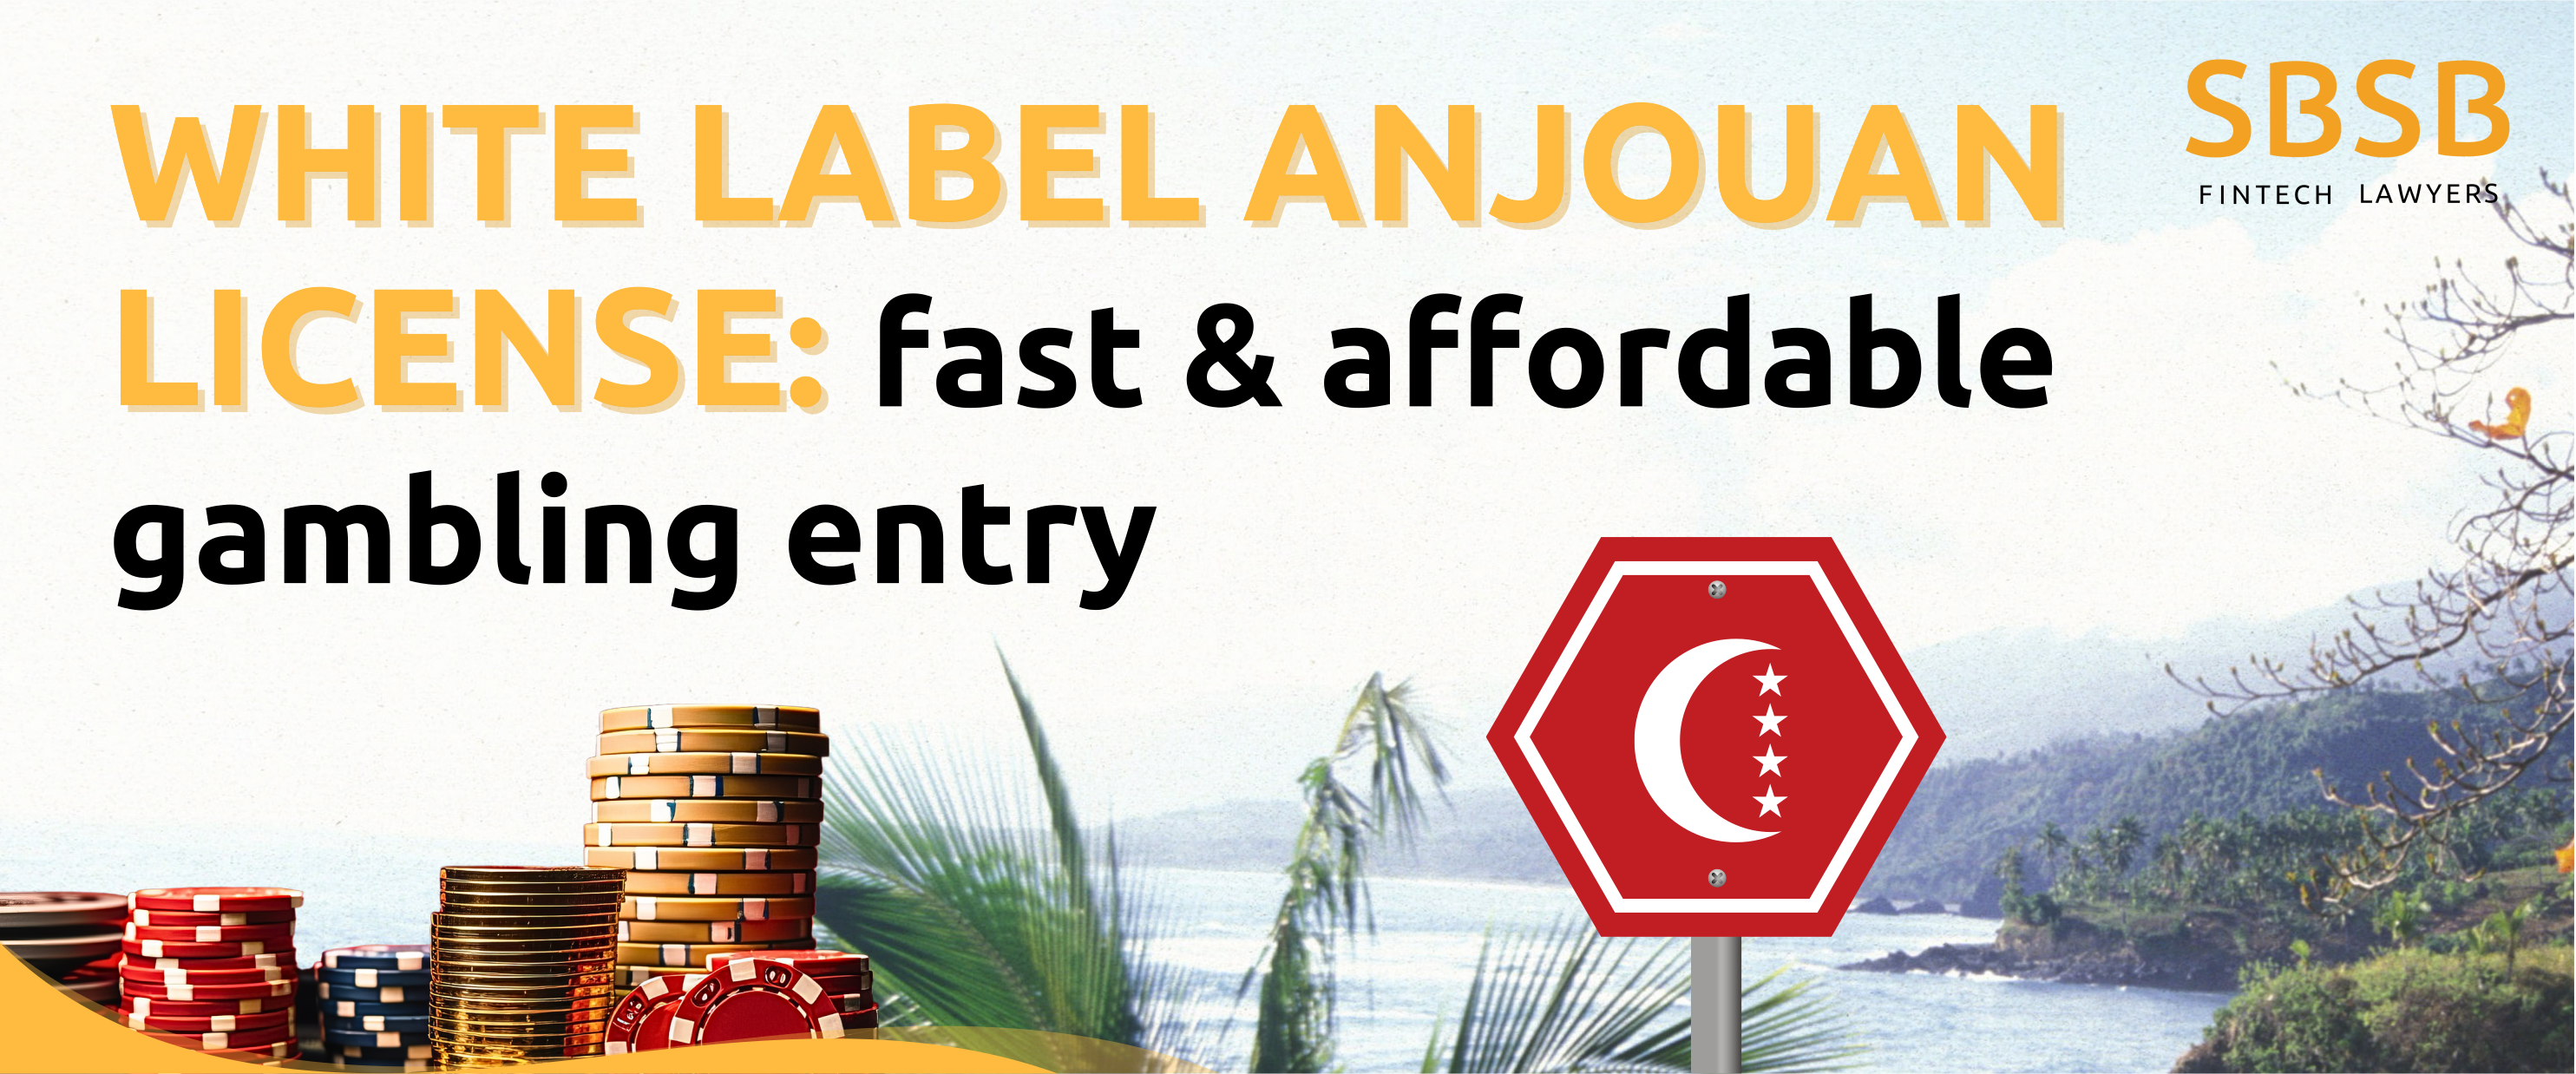 White Label Anjouan license: fast & affordable gambling entry - фото 38917